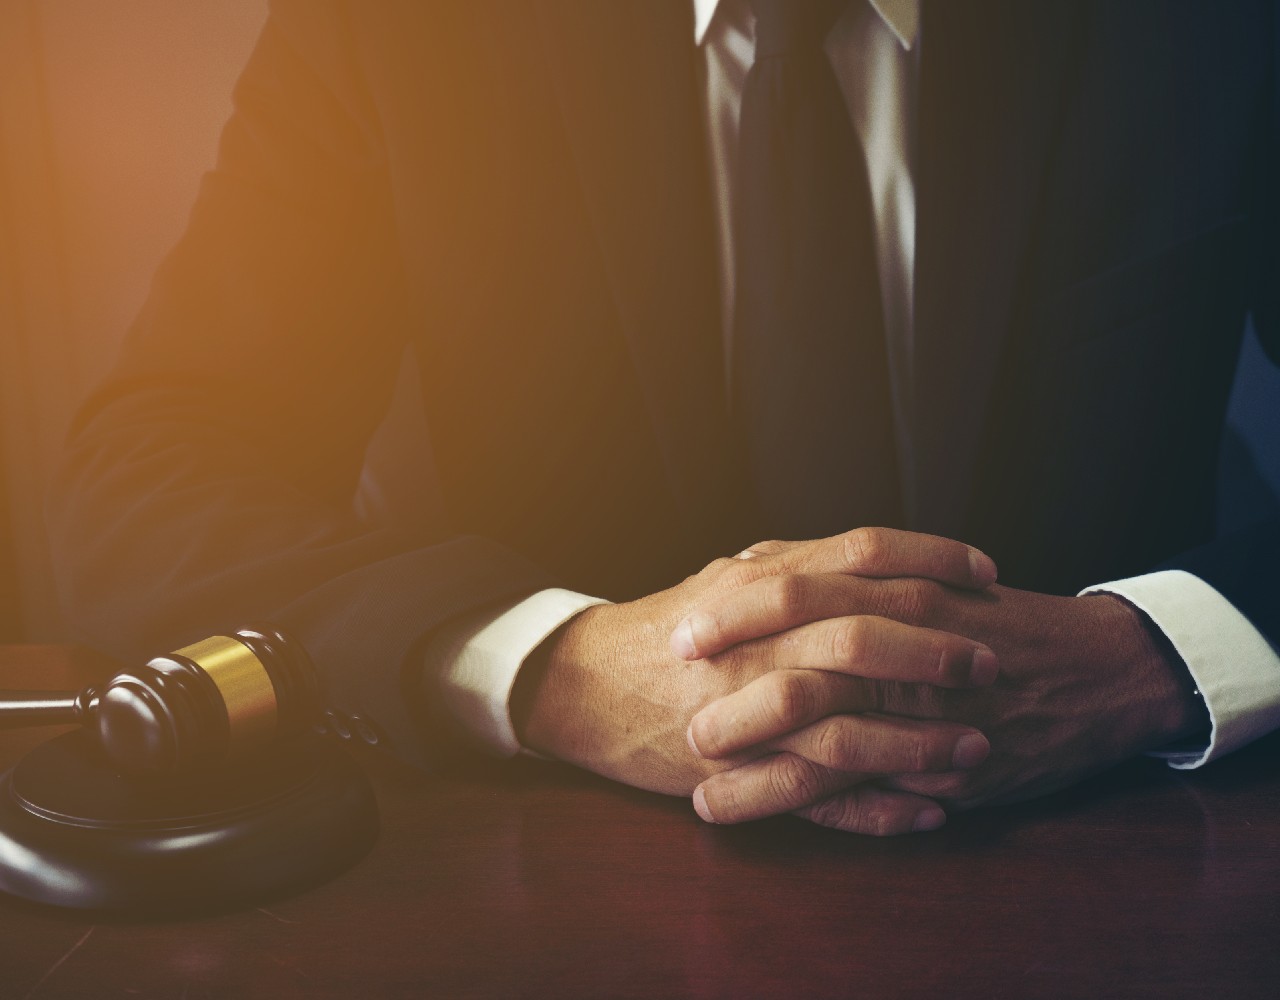 How does a defense lawyer build a sexual assault defense case?